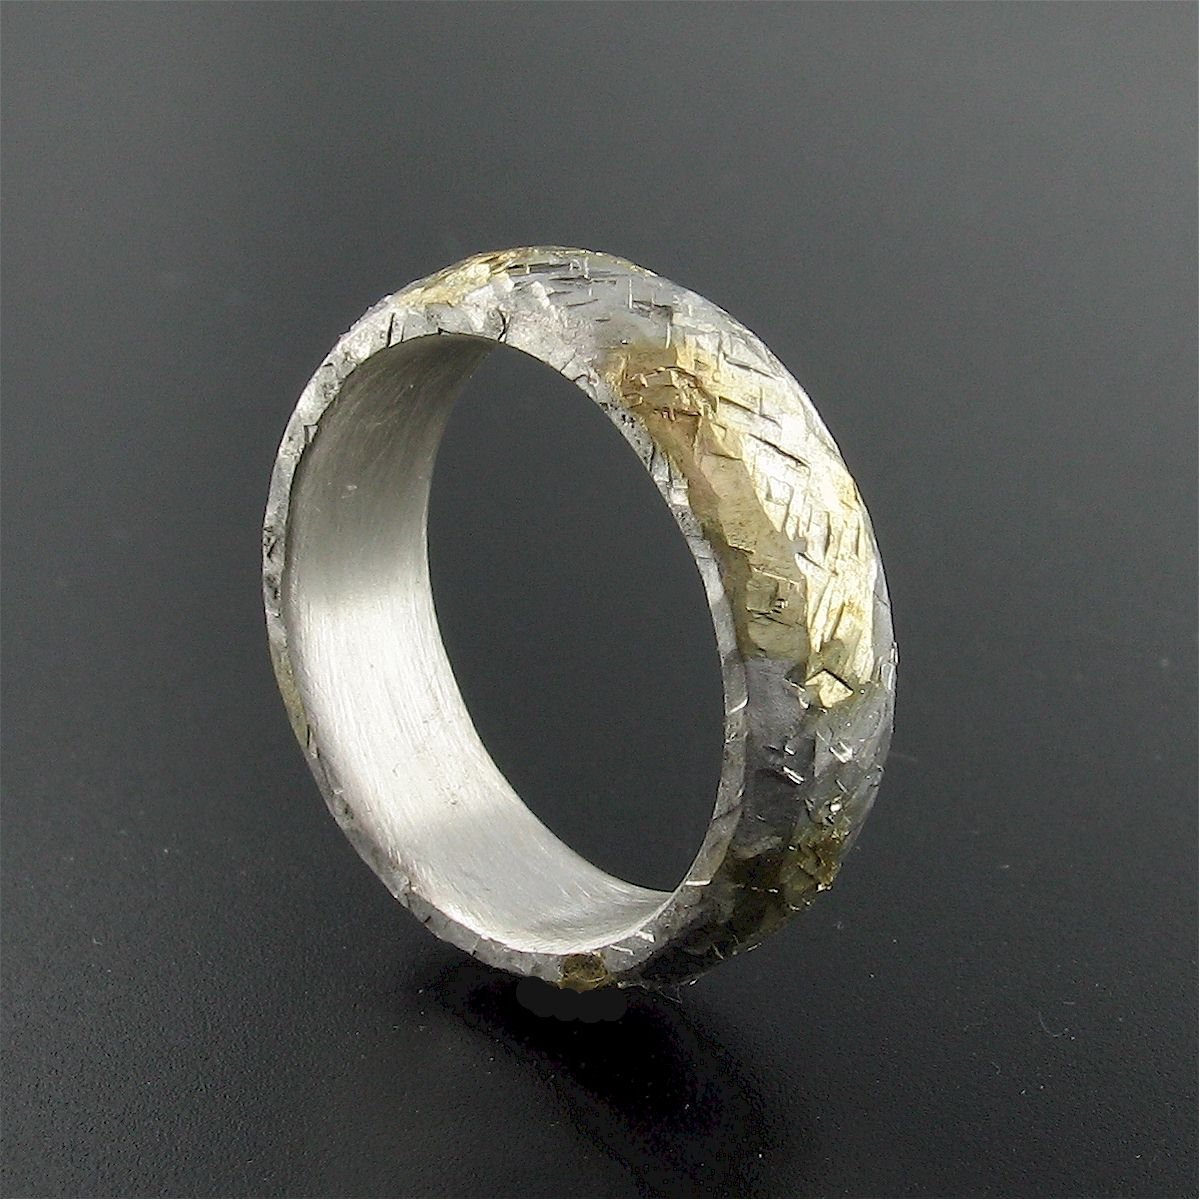 Silver Morning View court wedding ring with rustic hammered surface. Original design 5mm handmade band Designer Wedding Rings CumbrianDesigns 